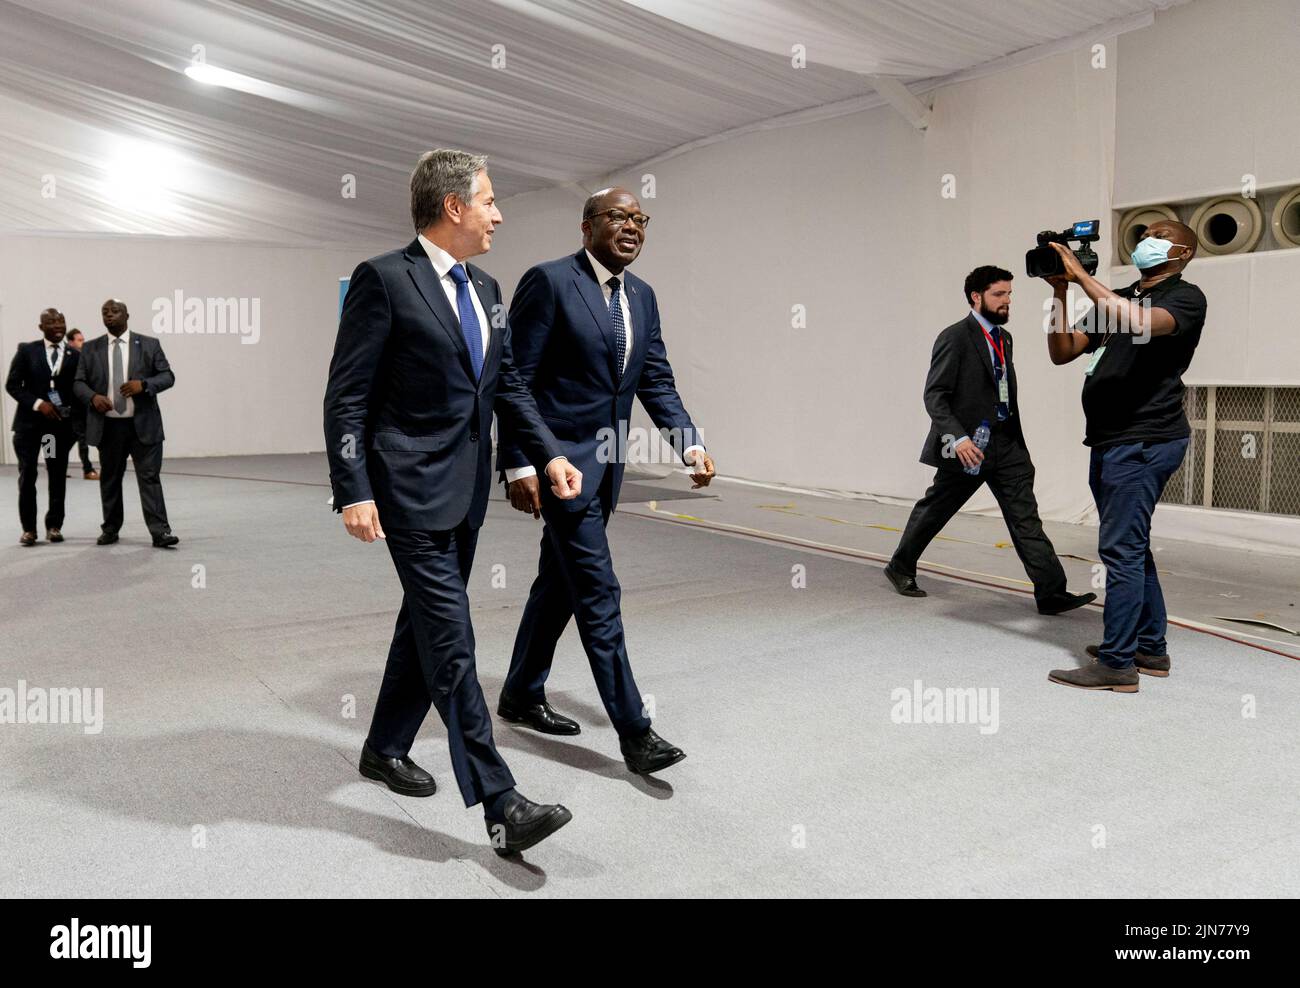 U.S. Secretary of State Antony Blinken and DRC Foreign Minister Christophe Lutundula arrive for a news conference at Cite de l’OUA in Kinshasa, Democratic Republic of the Congo, August 9, 2022. Andrew Harnik/Pool via REUTERS Stock Photo